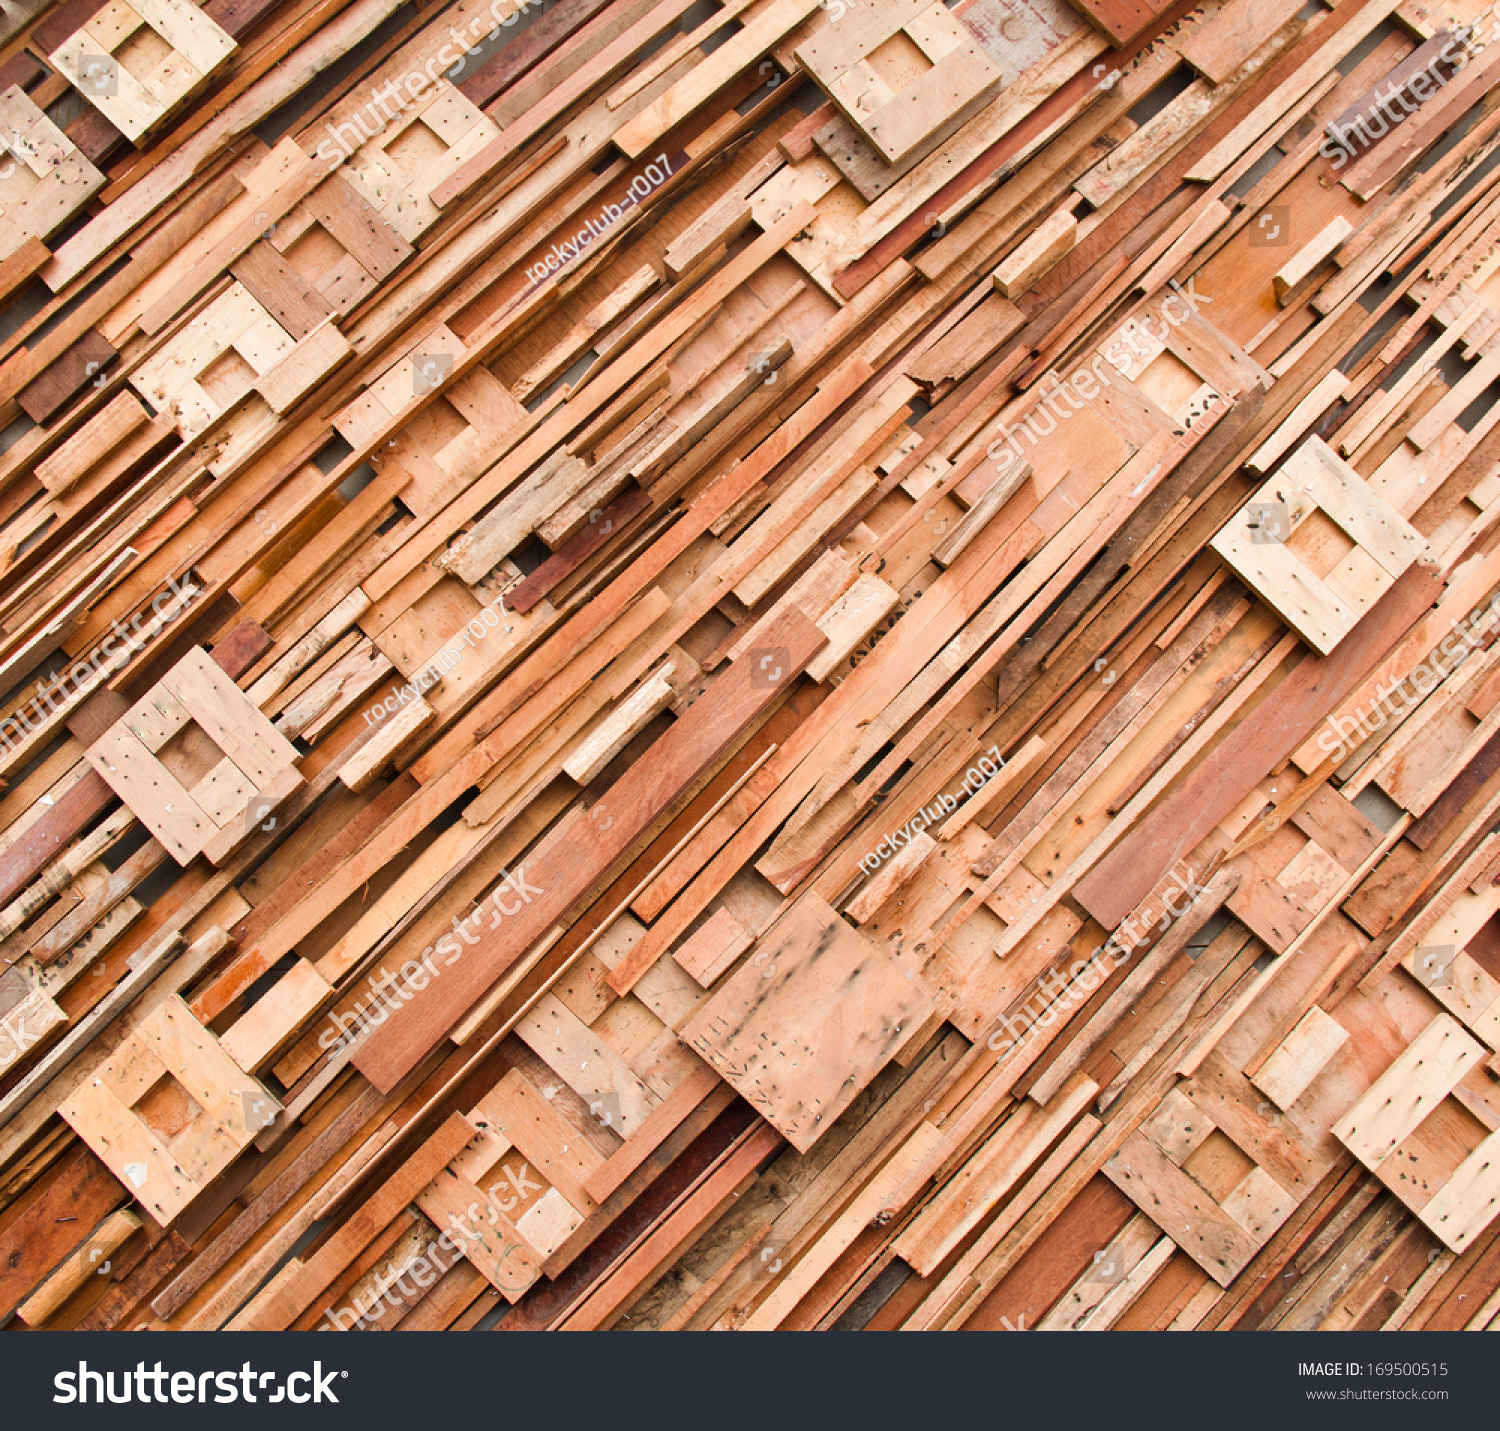 Edit Images Free Online - wooden wall | Shutterstock Editor